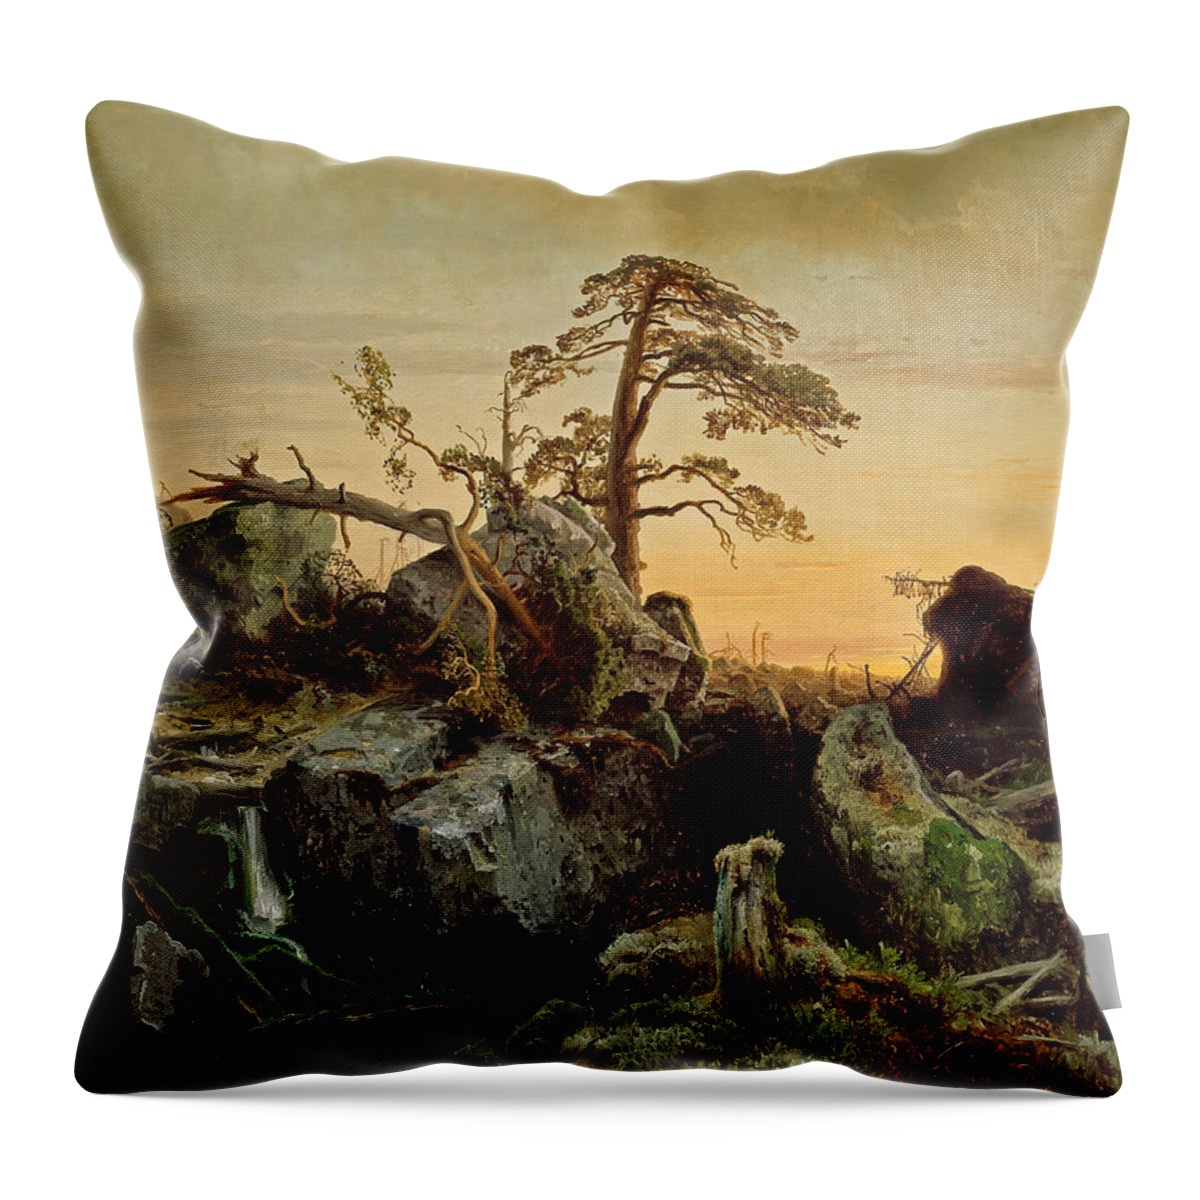 August Cappelen Throw Pillow featuring the painting Decaying forest by August Cappelen